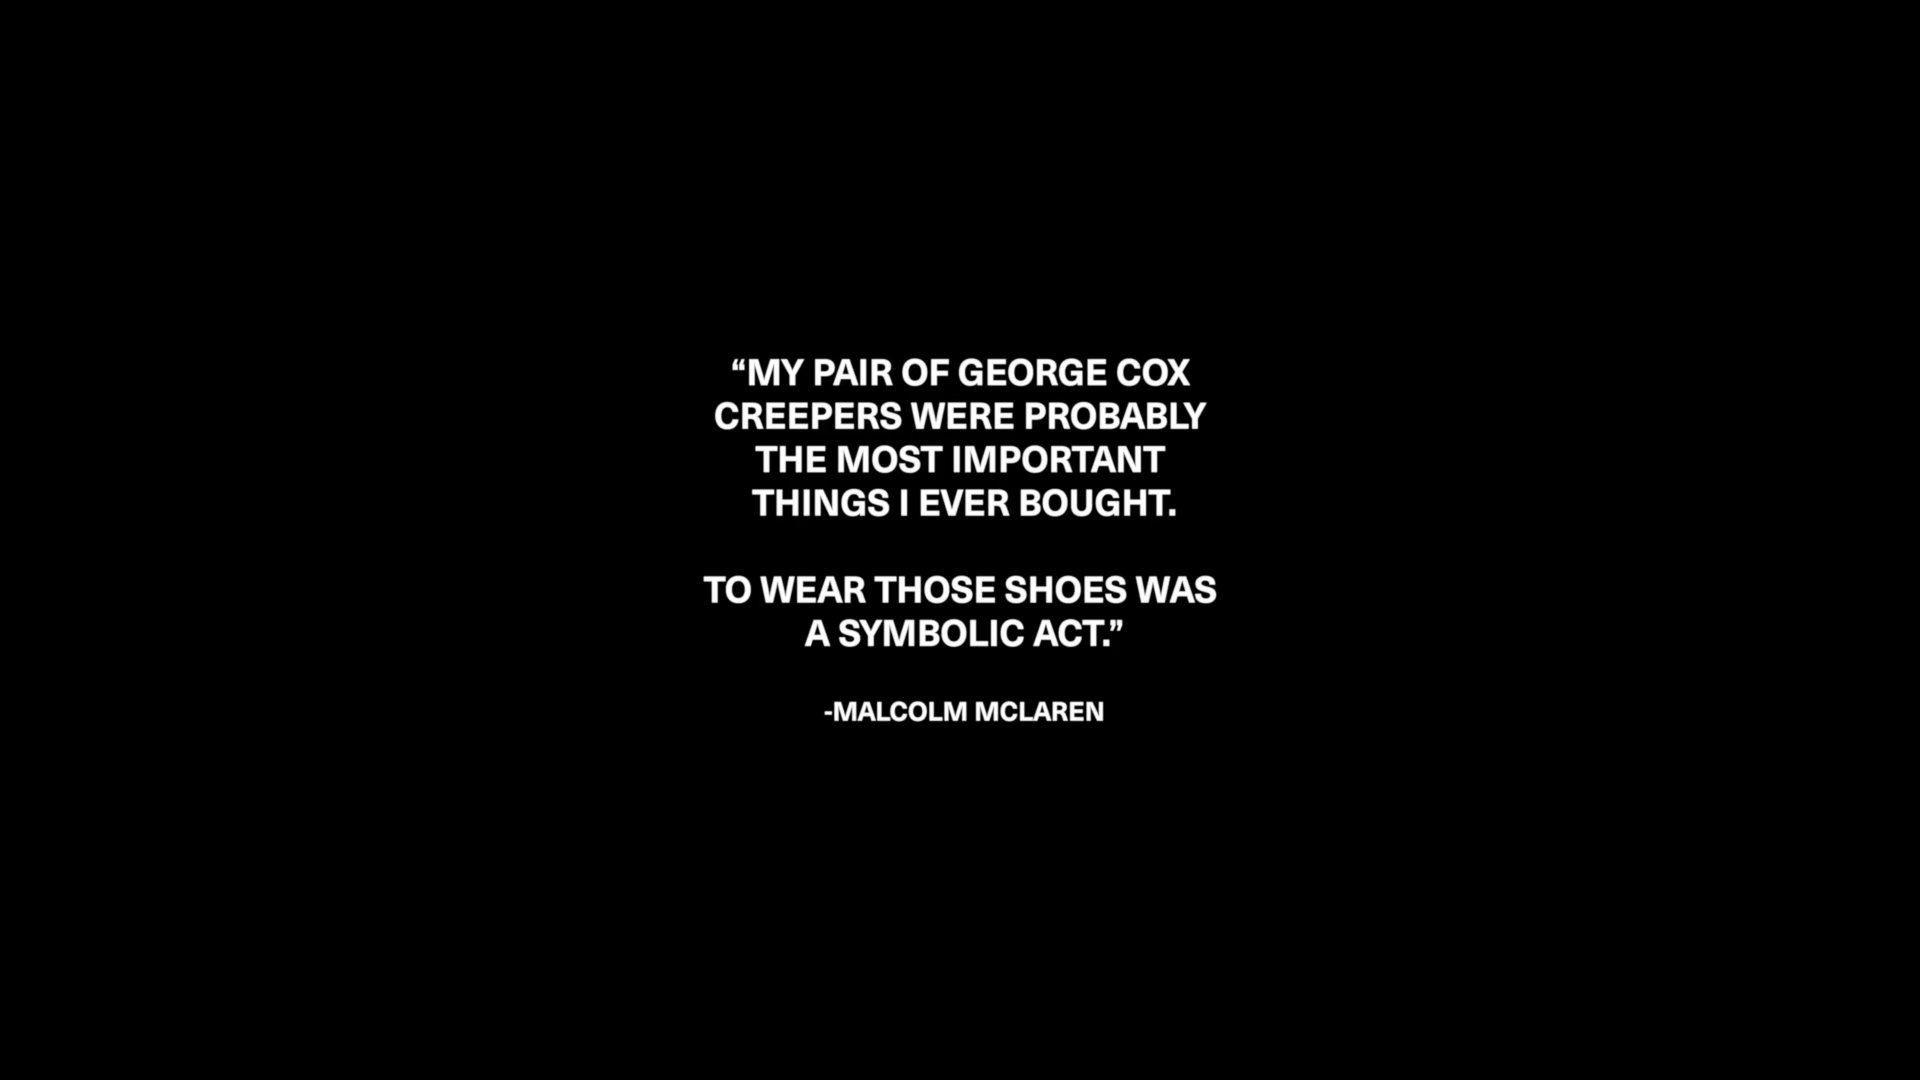 Video opening frame quote by Malcolm McLaren